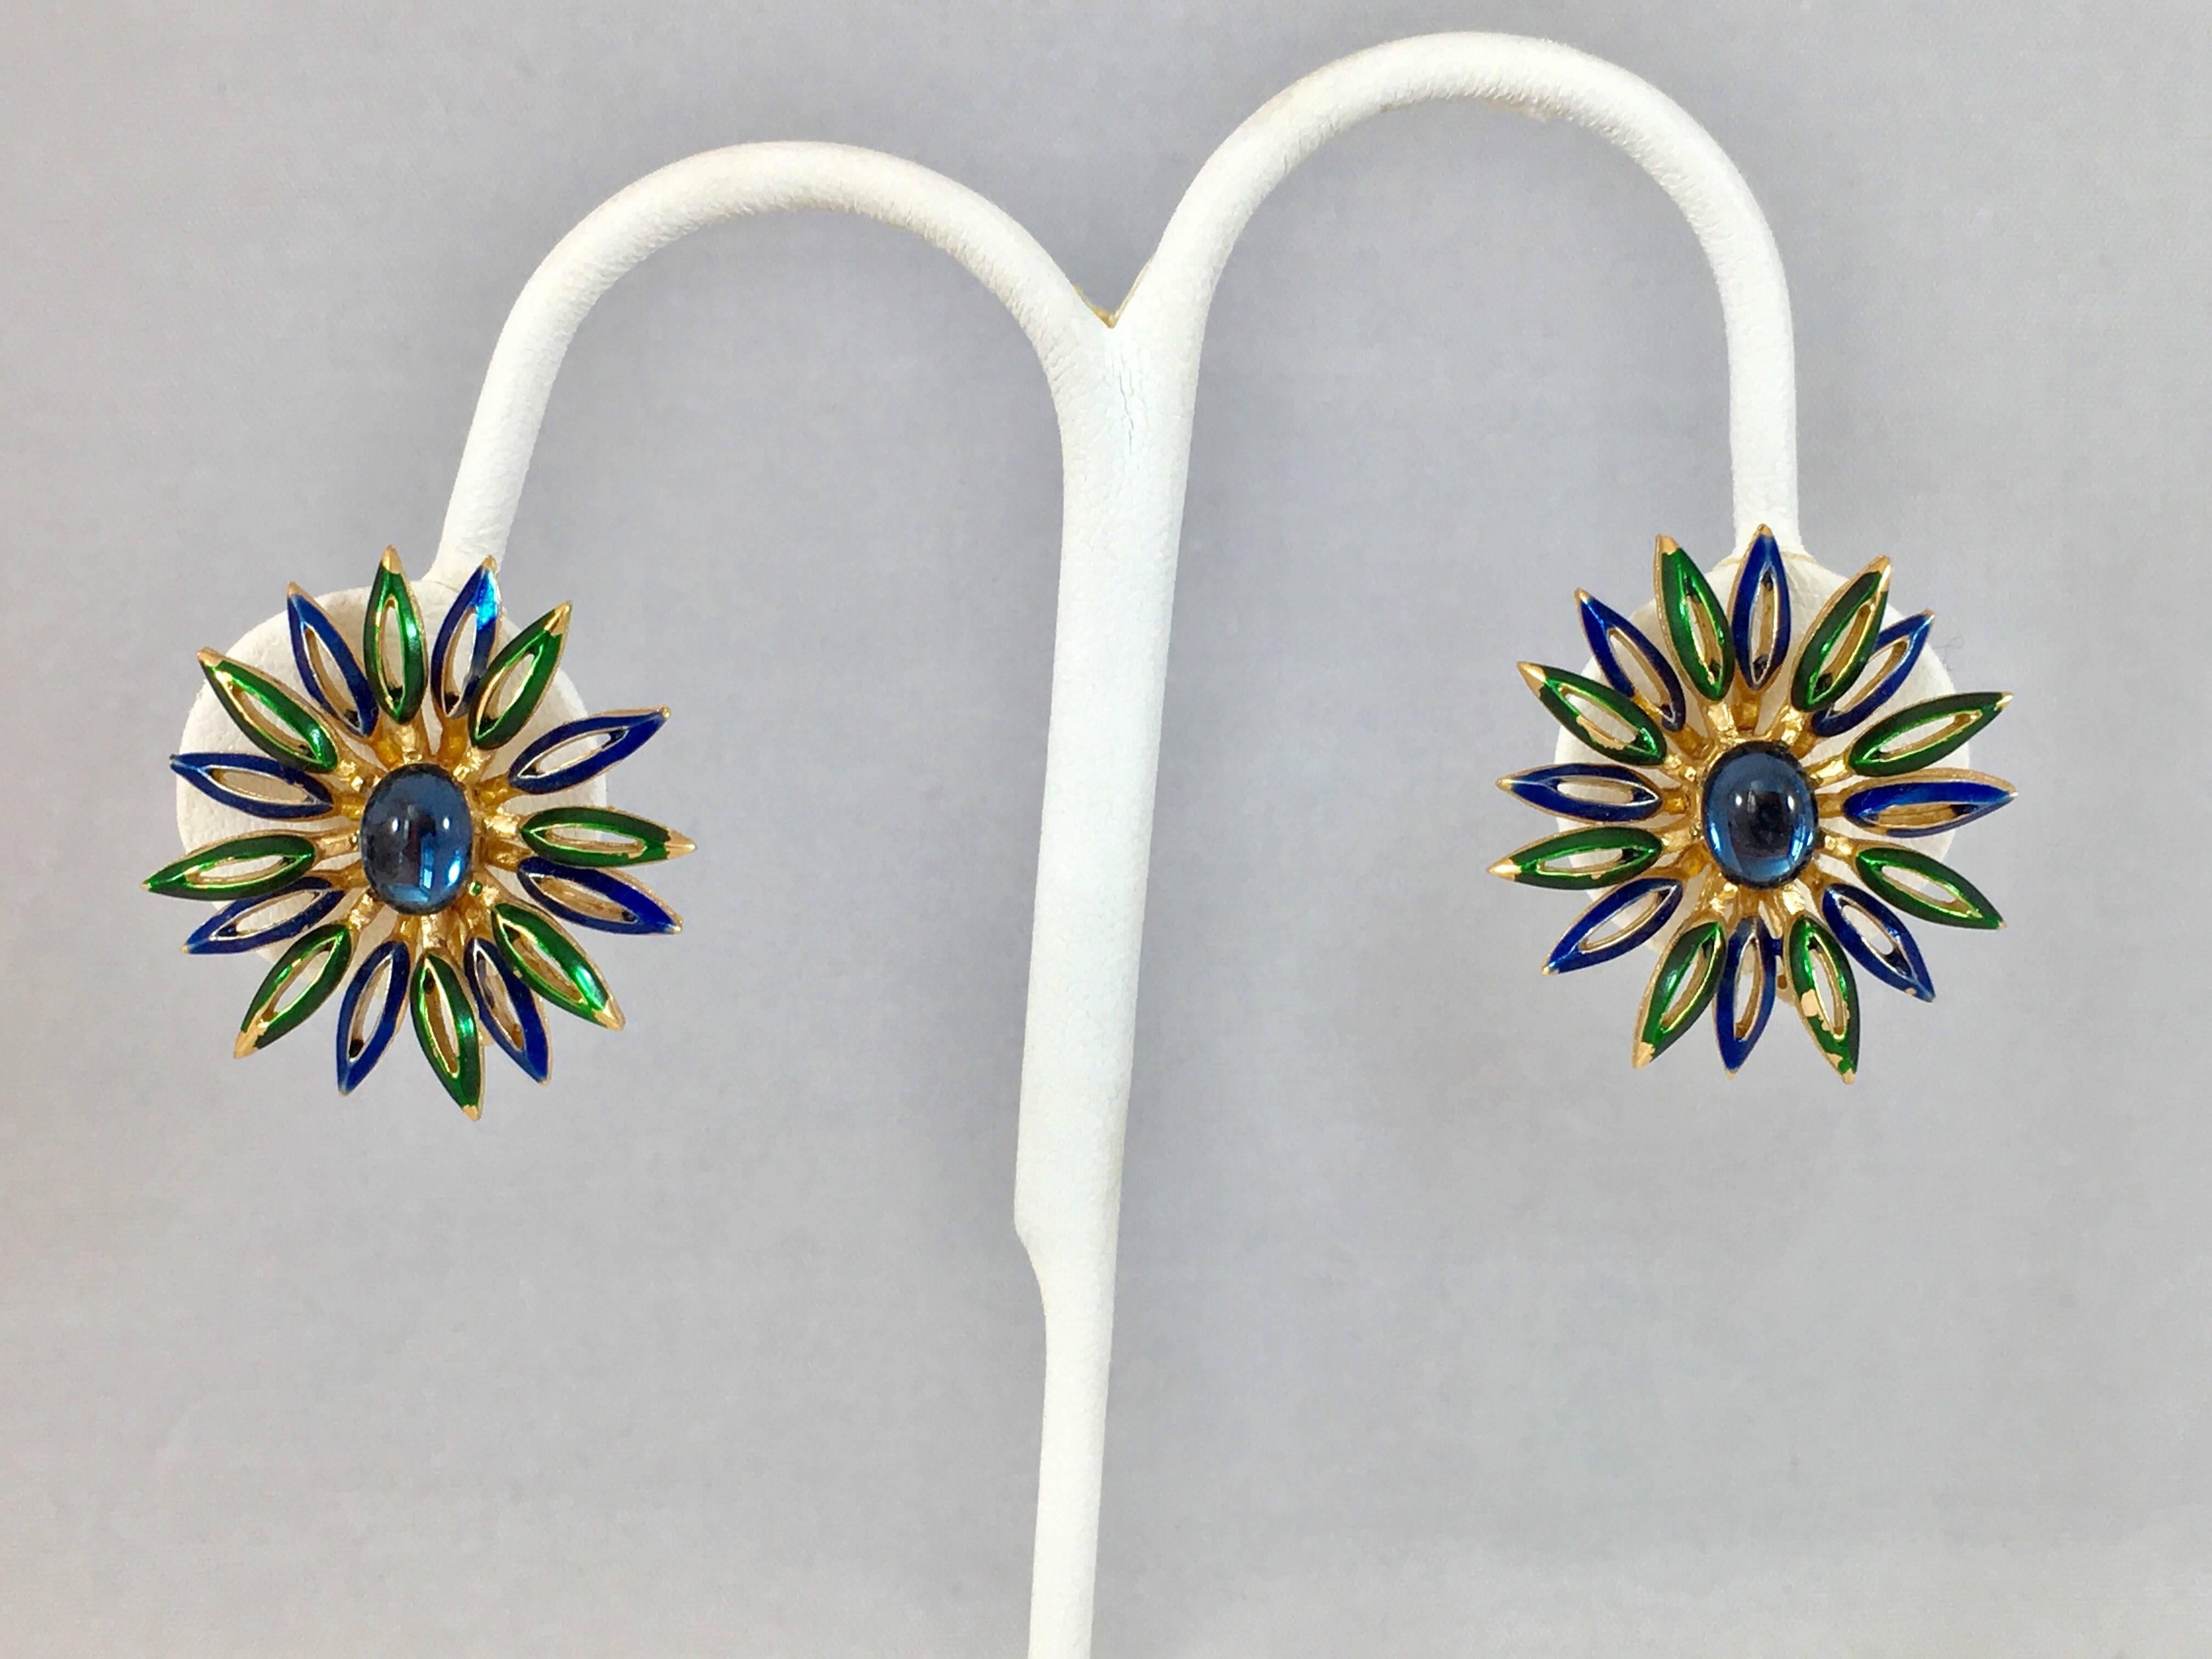 This is a fun pair of 1960s Trifari flower clip-on earrings. They are made out of goldtone metal, have blue glass centers and enameled blue and green petals. They measures 1 1/8 inches long by 1 1/16 inches wide. They are in excellent condition.